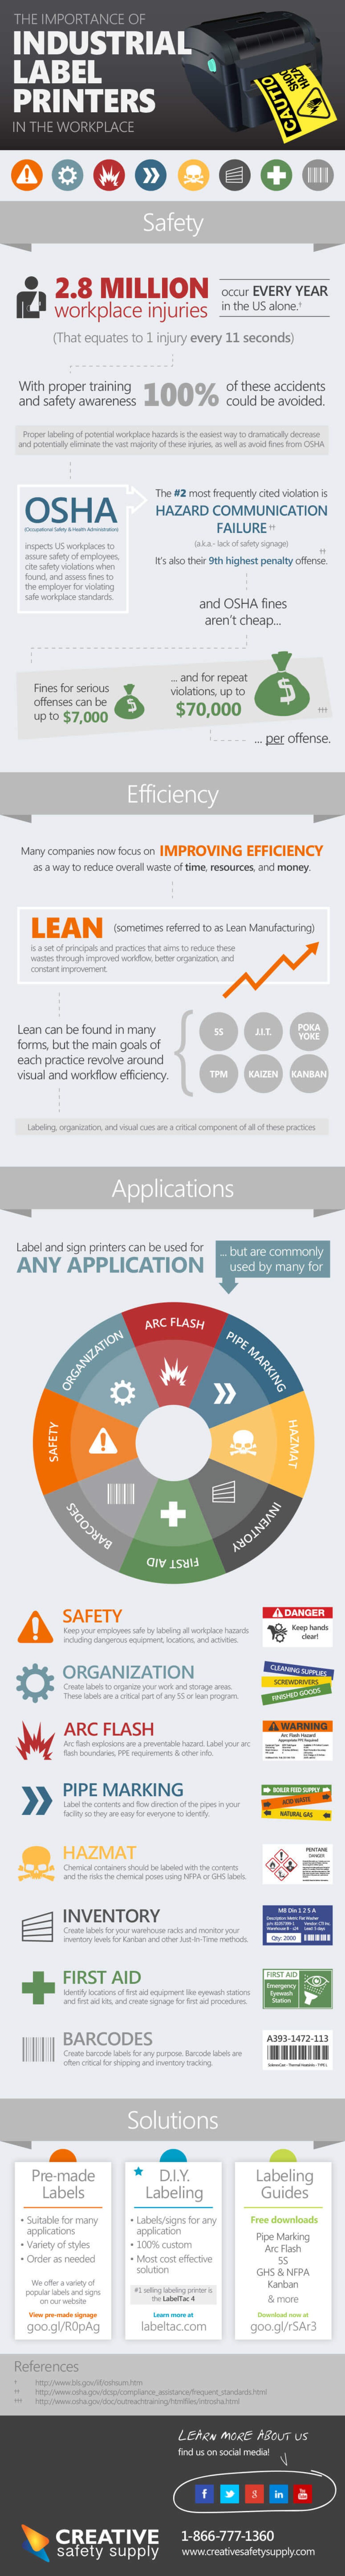 printing industry osha requirements - Industrial Label Printers in the Workplace [Infographic]